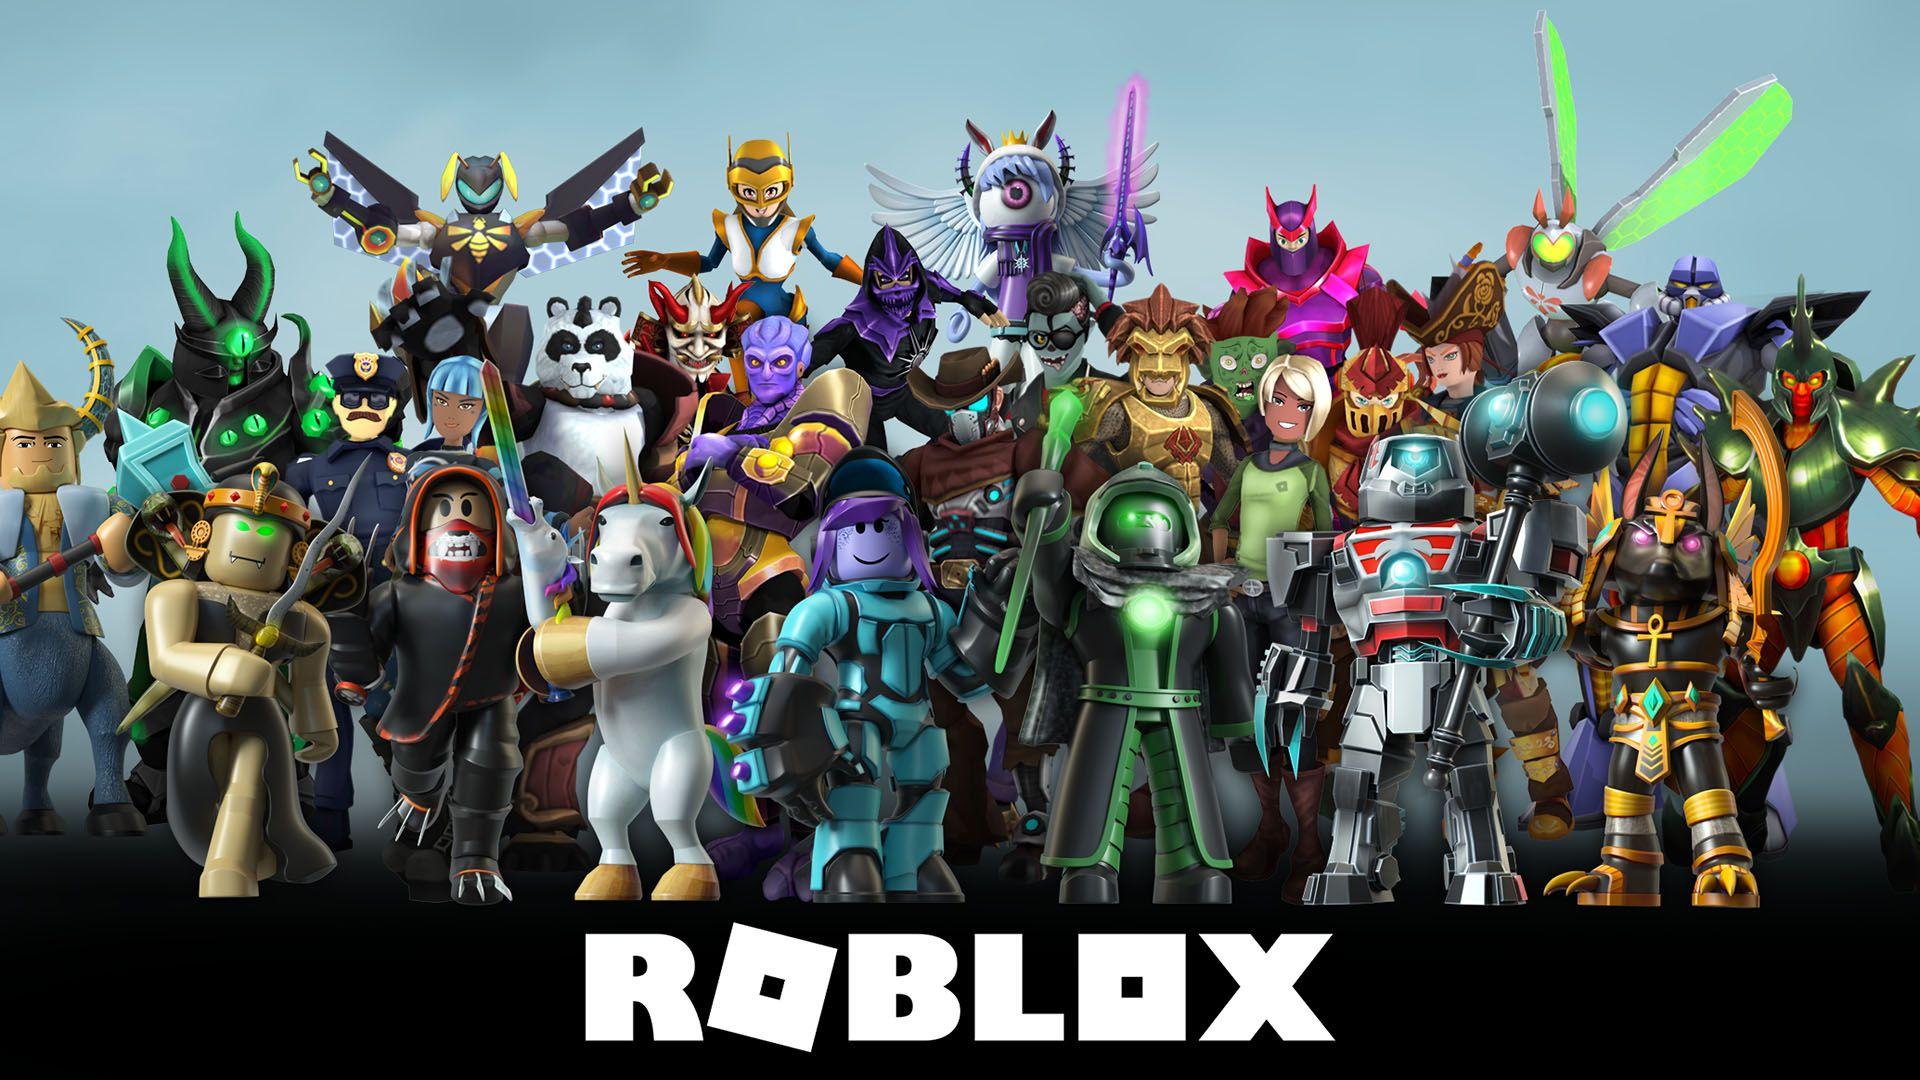 Roblox Characters Wallpapers Top Free Roblox Characters Backgrounds Wallpaperaccess - roblox screensaver character